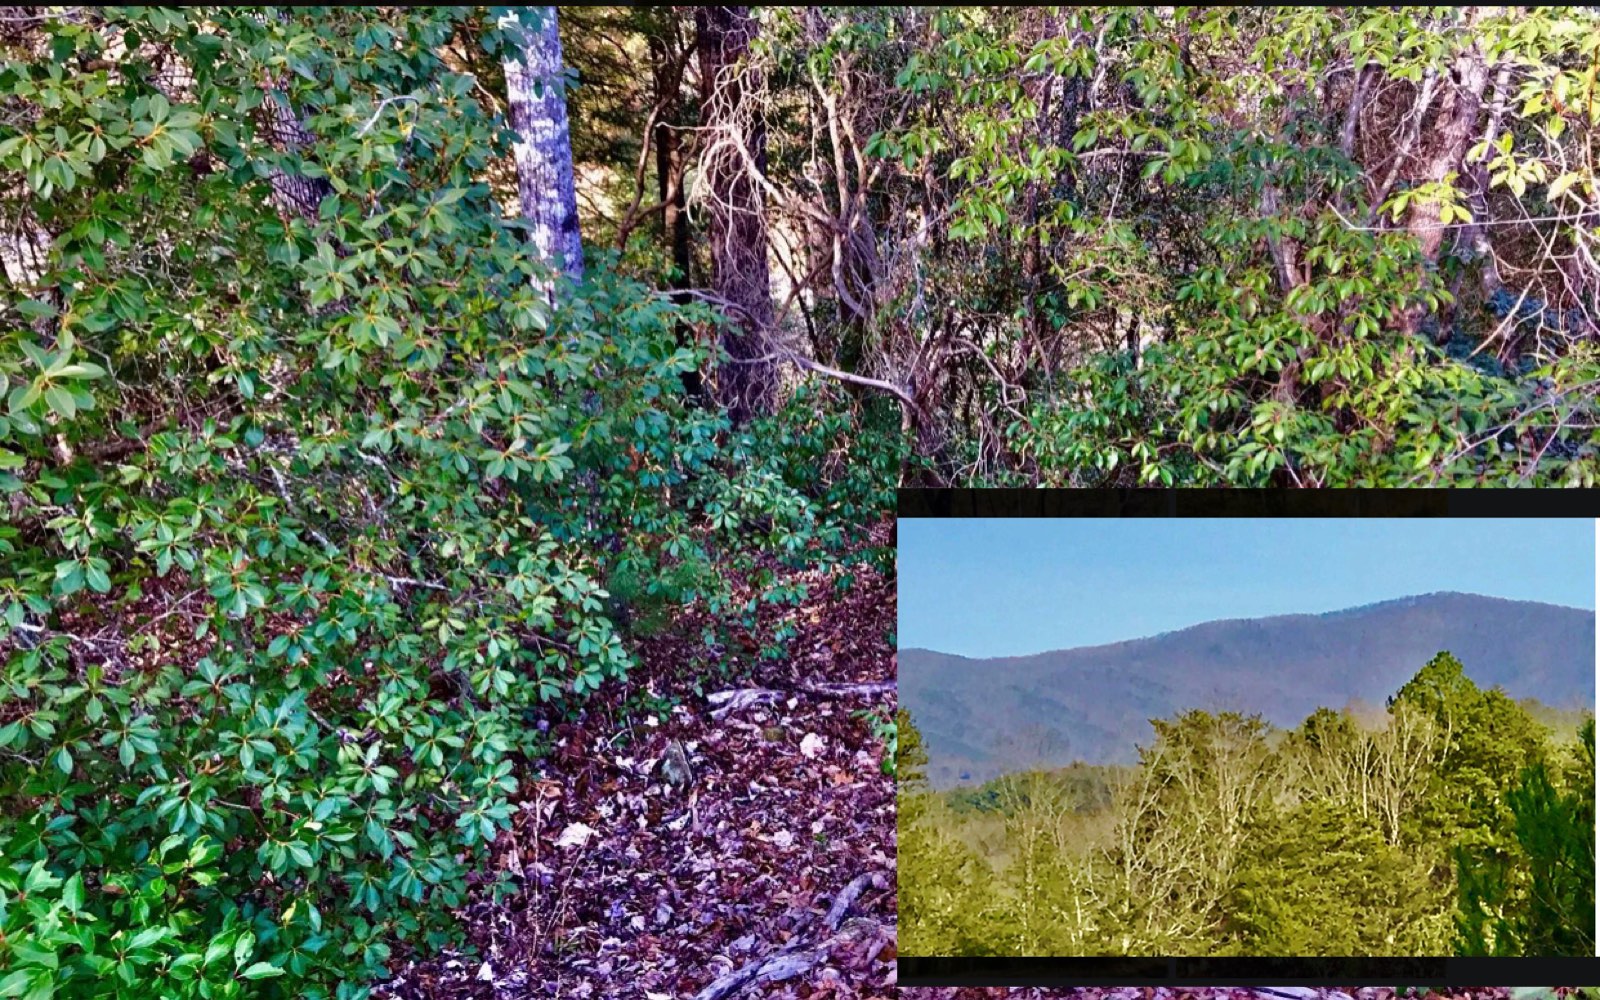 Love Golf? Love the N GA Mountains? Ready to build your very own mountain dream home? Come check this lot out. Build your home with a view of the golf course and a mountain view. The lot backs up to the golf course . Also private end of the road on a cul de sac. Low HOA fees, all paved access, river access...all this in an established community that is conveniently located between Blue Ridge and Ellijay and close to all you need.